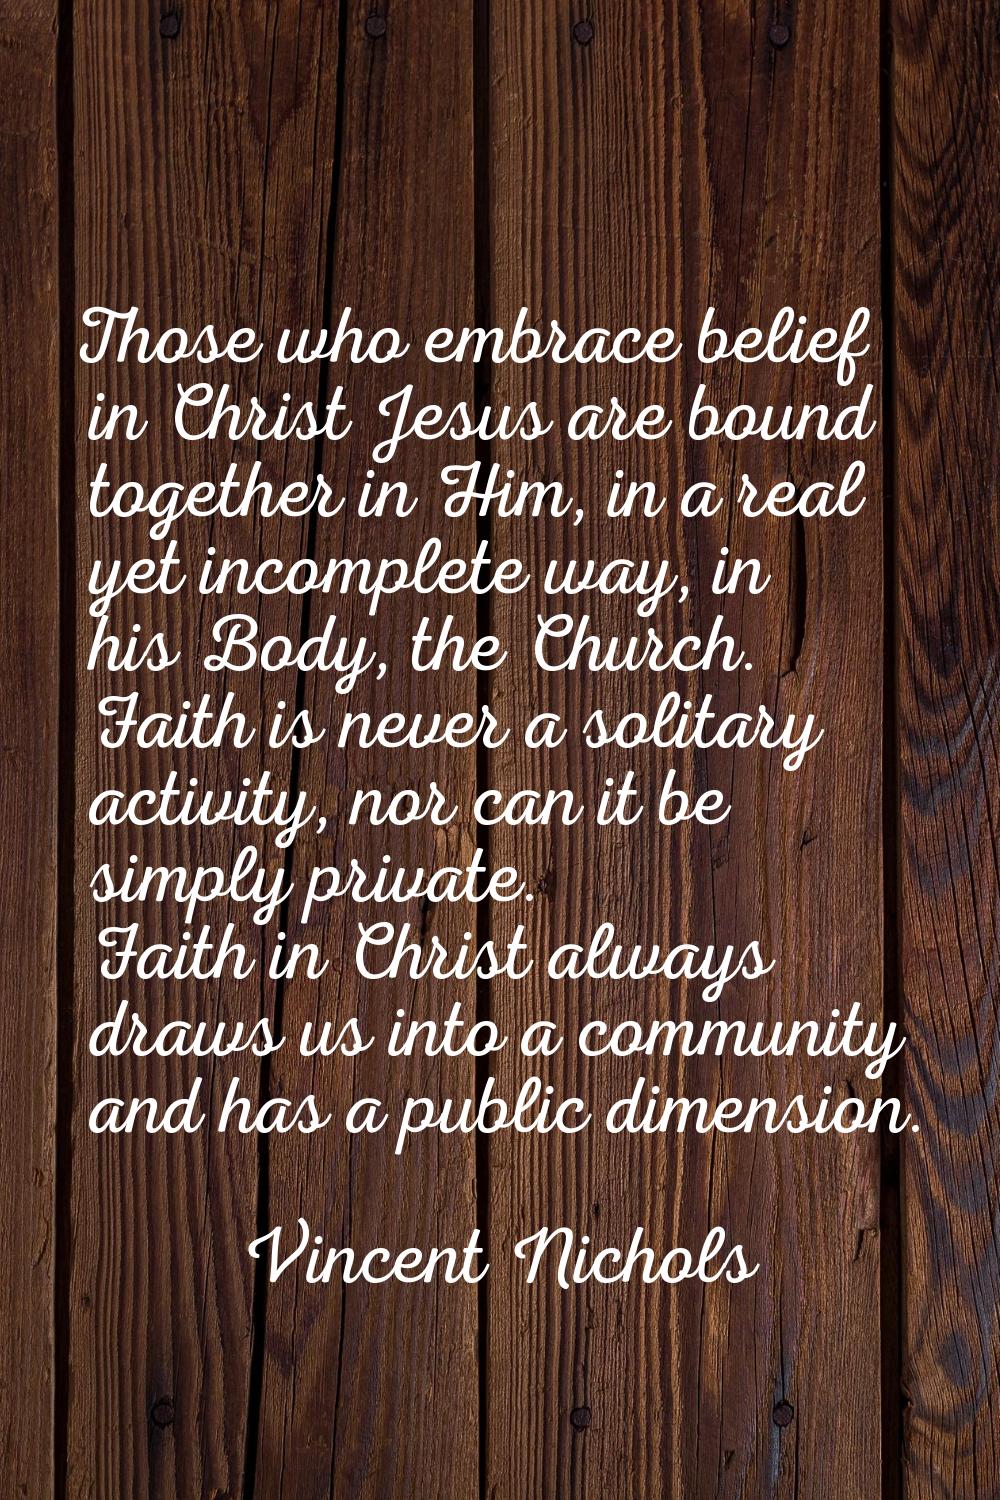 Those who embrace belief in Christ Jesus are bound together in Him, in a real yet incomplete way, i